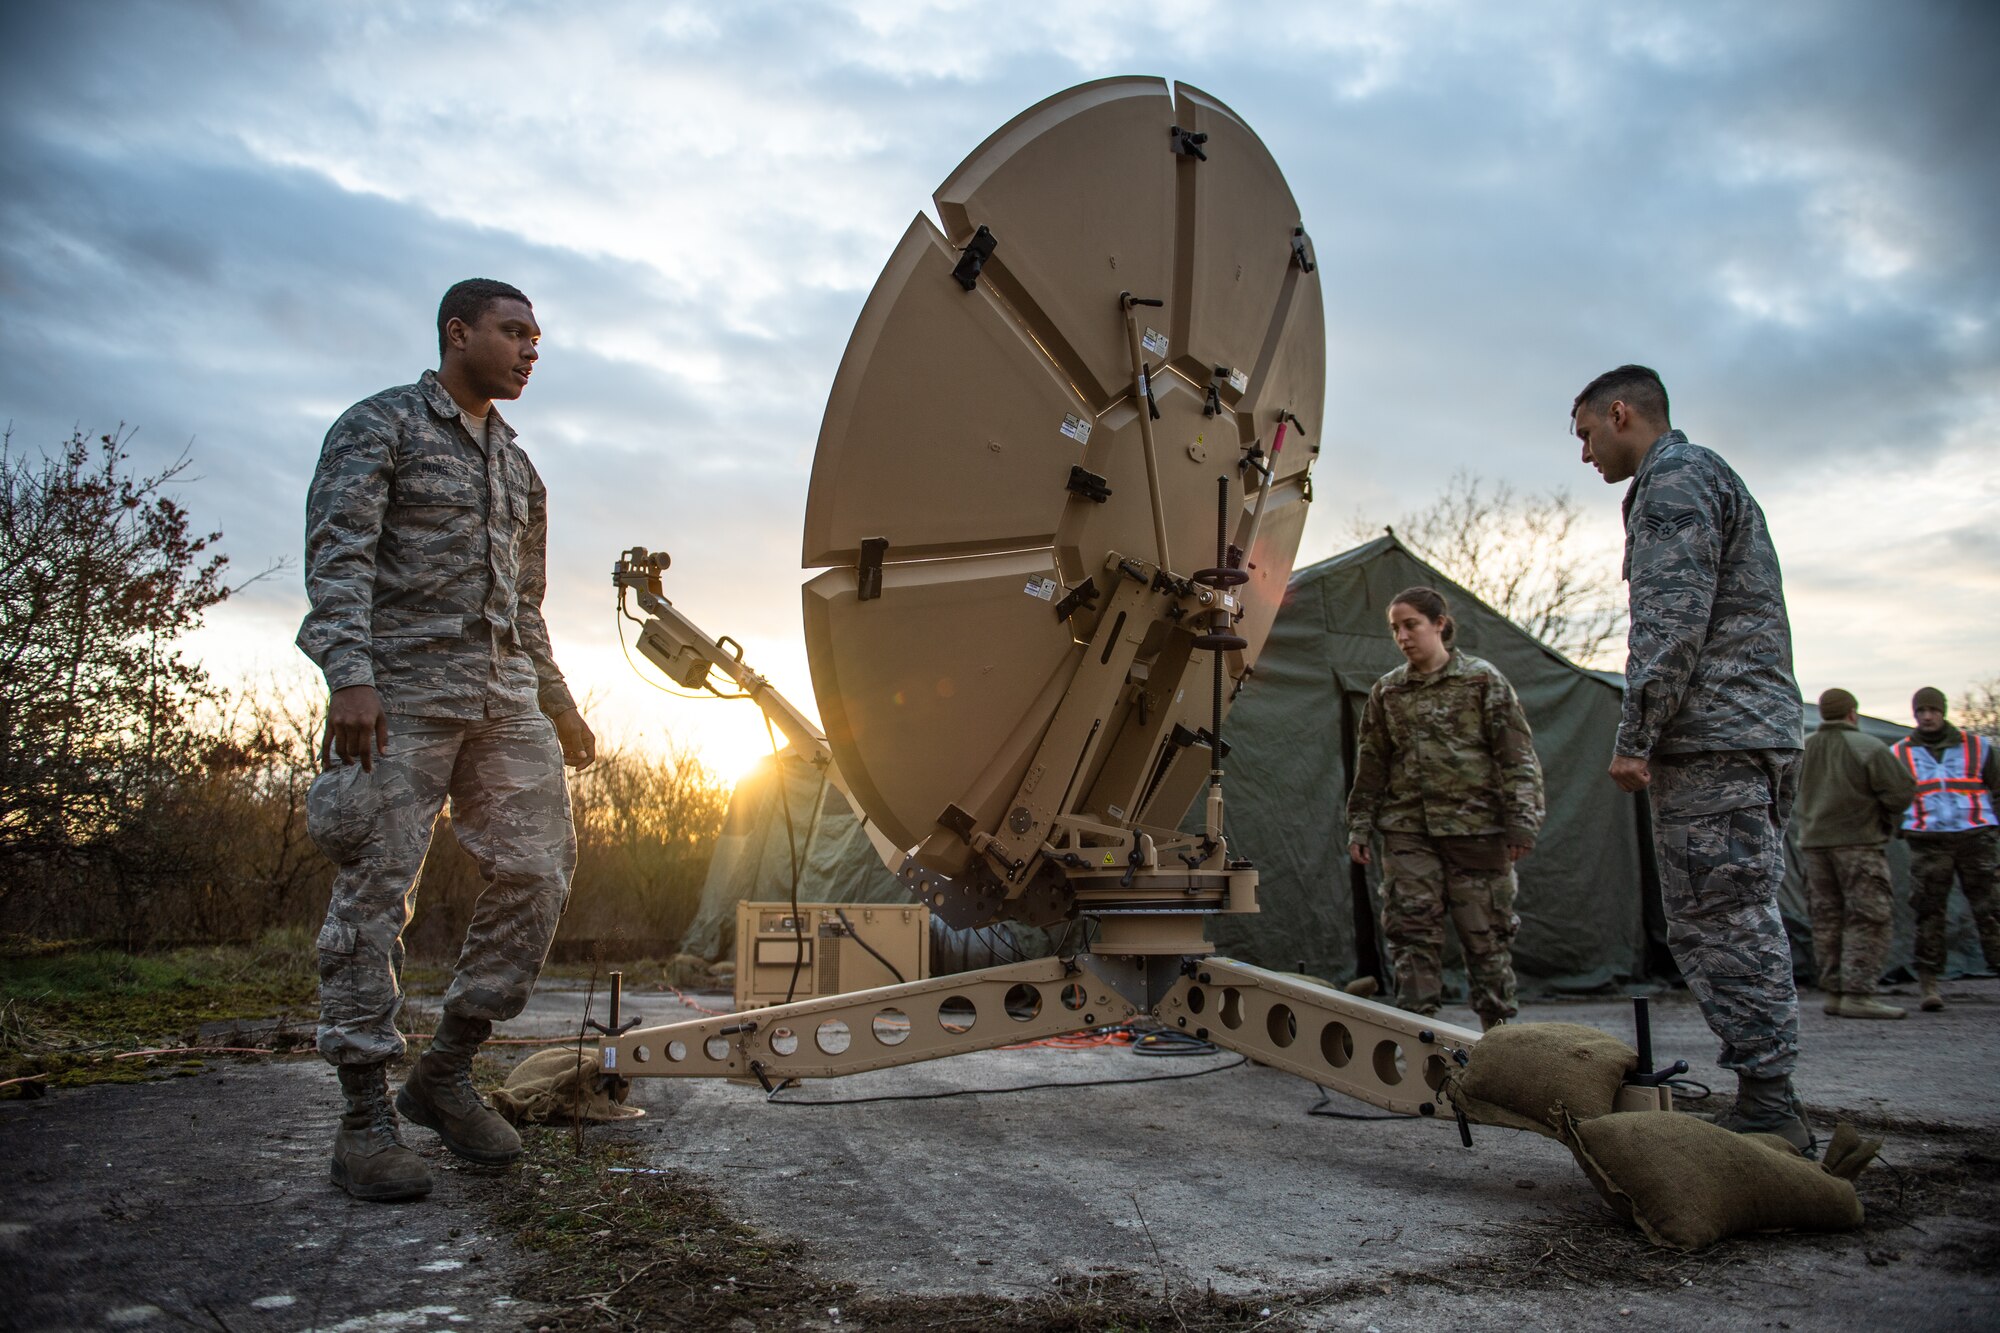 U.S. Airmen assigned to the 1st Combat Communications Squadron adjust a satellite dish during exercise Heavy Rain in Grostenquin, France, Jan. 15, 2020. The 1st CBCS technicians provided the 435th Security Forces Squadron with electronic warfare scenarios to bolster their capabilities in a contested communications environment while sharpening their own skills on spectrum interference. (U.S. Air Force photo by Staff Sgt. Devin Boyer)